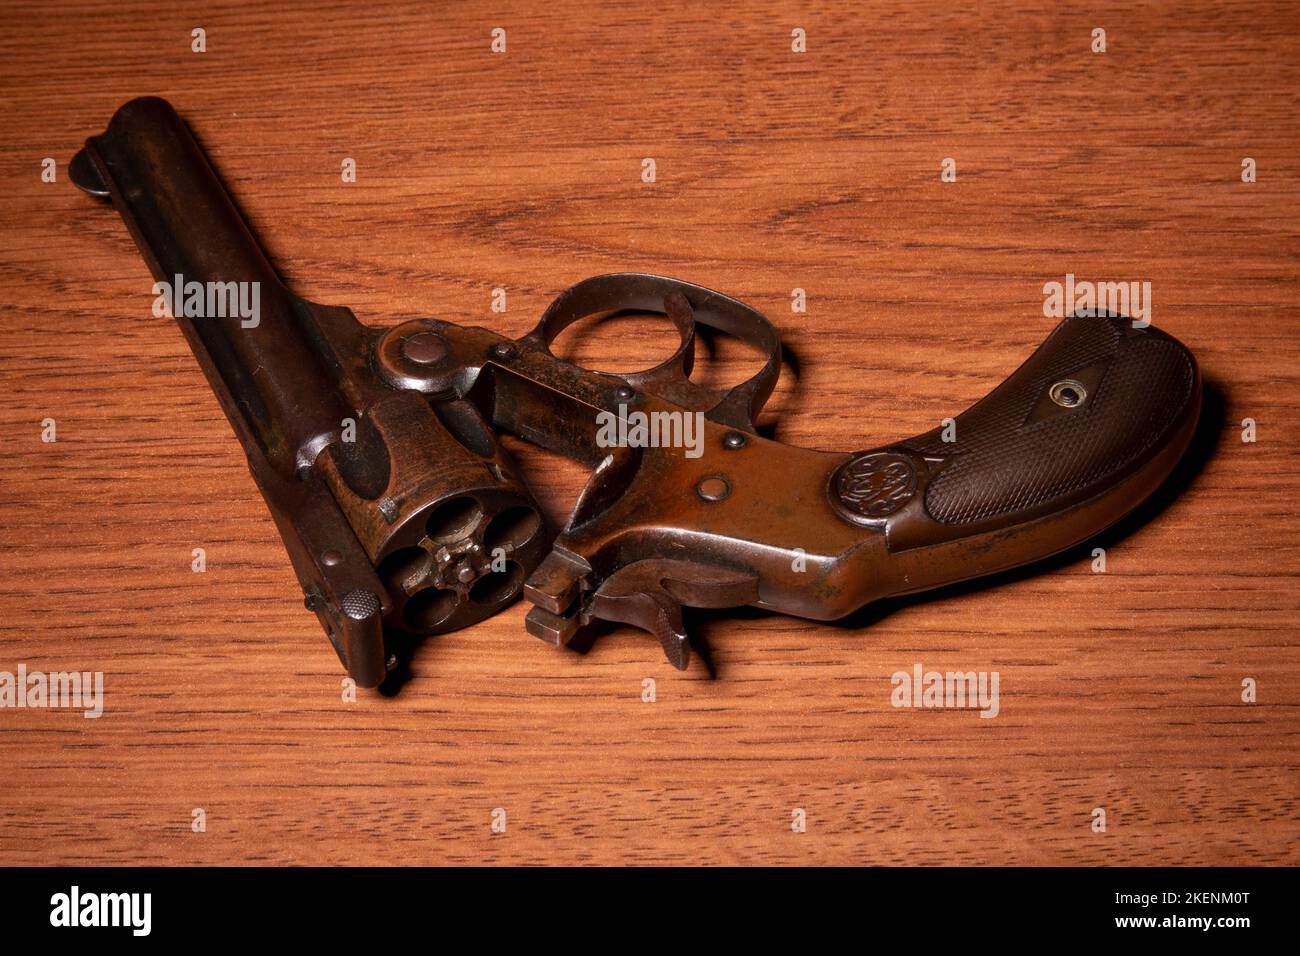 Smith & Wesson 32 Double Action Fourth Model Revolver Stock Photo